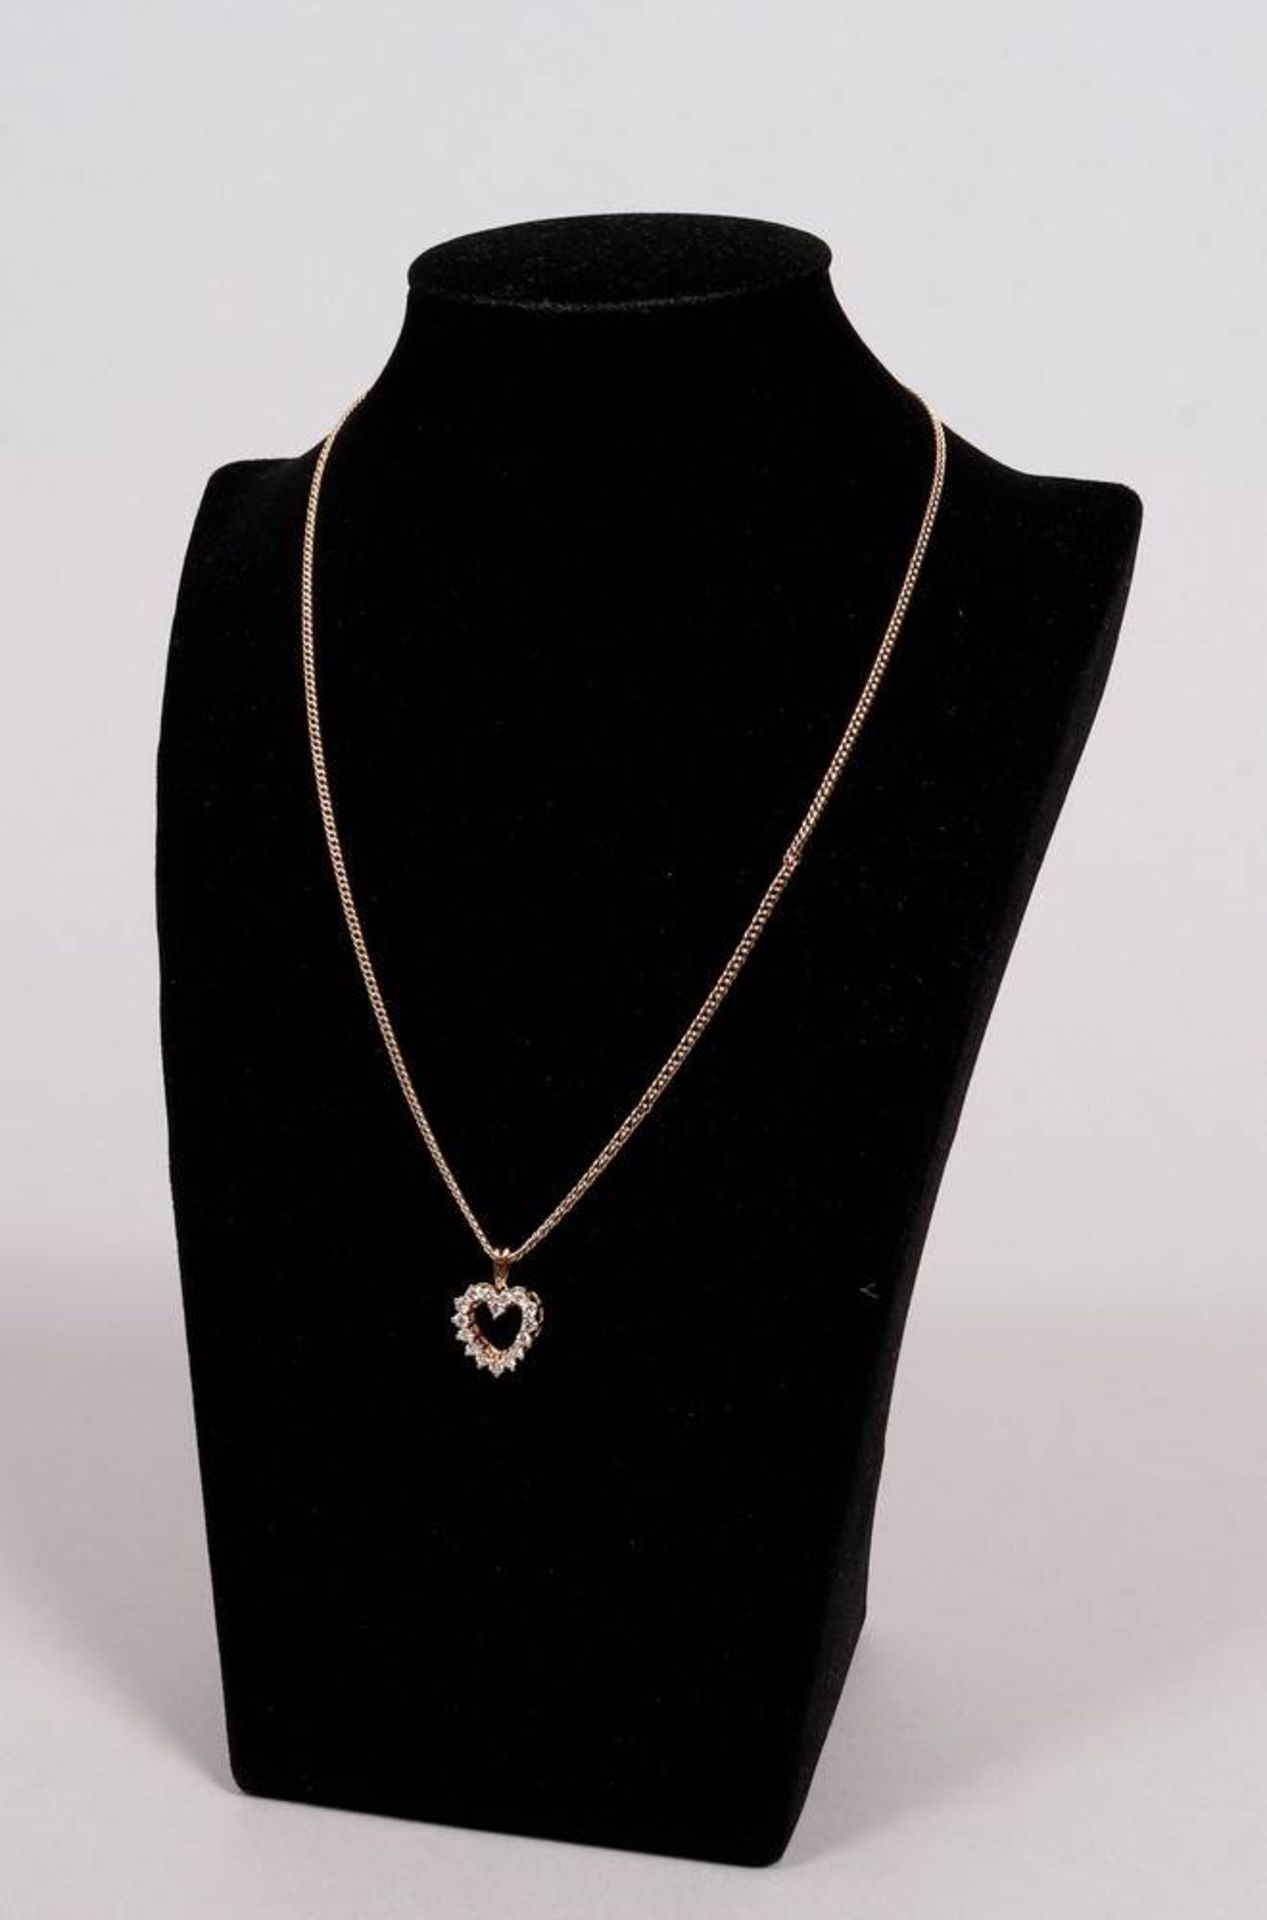 Heart pendant with chain, 585 GG